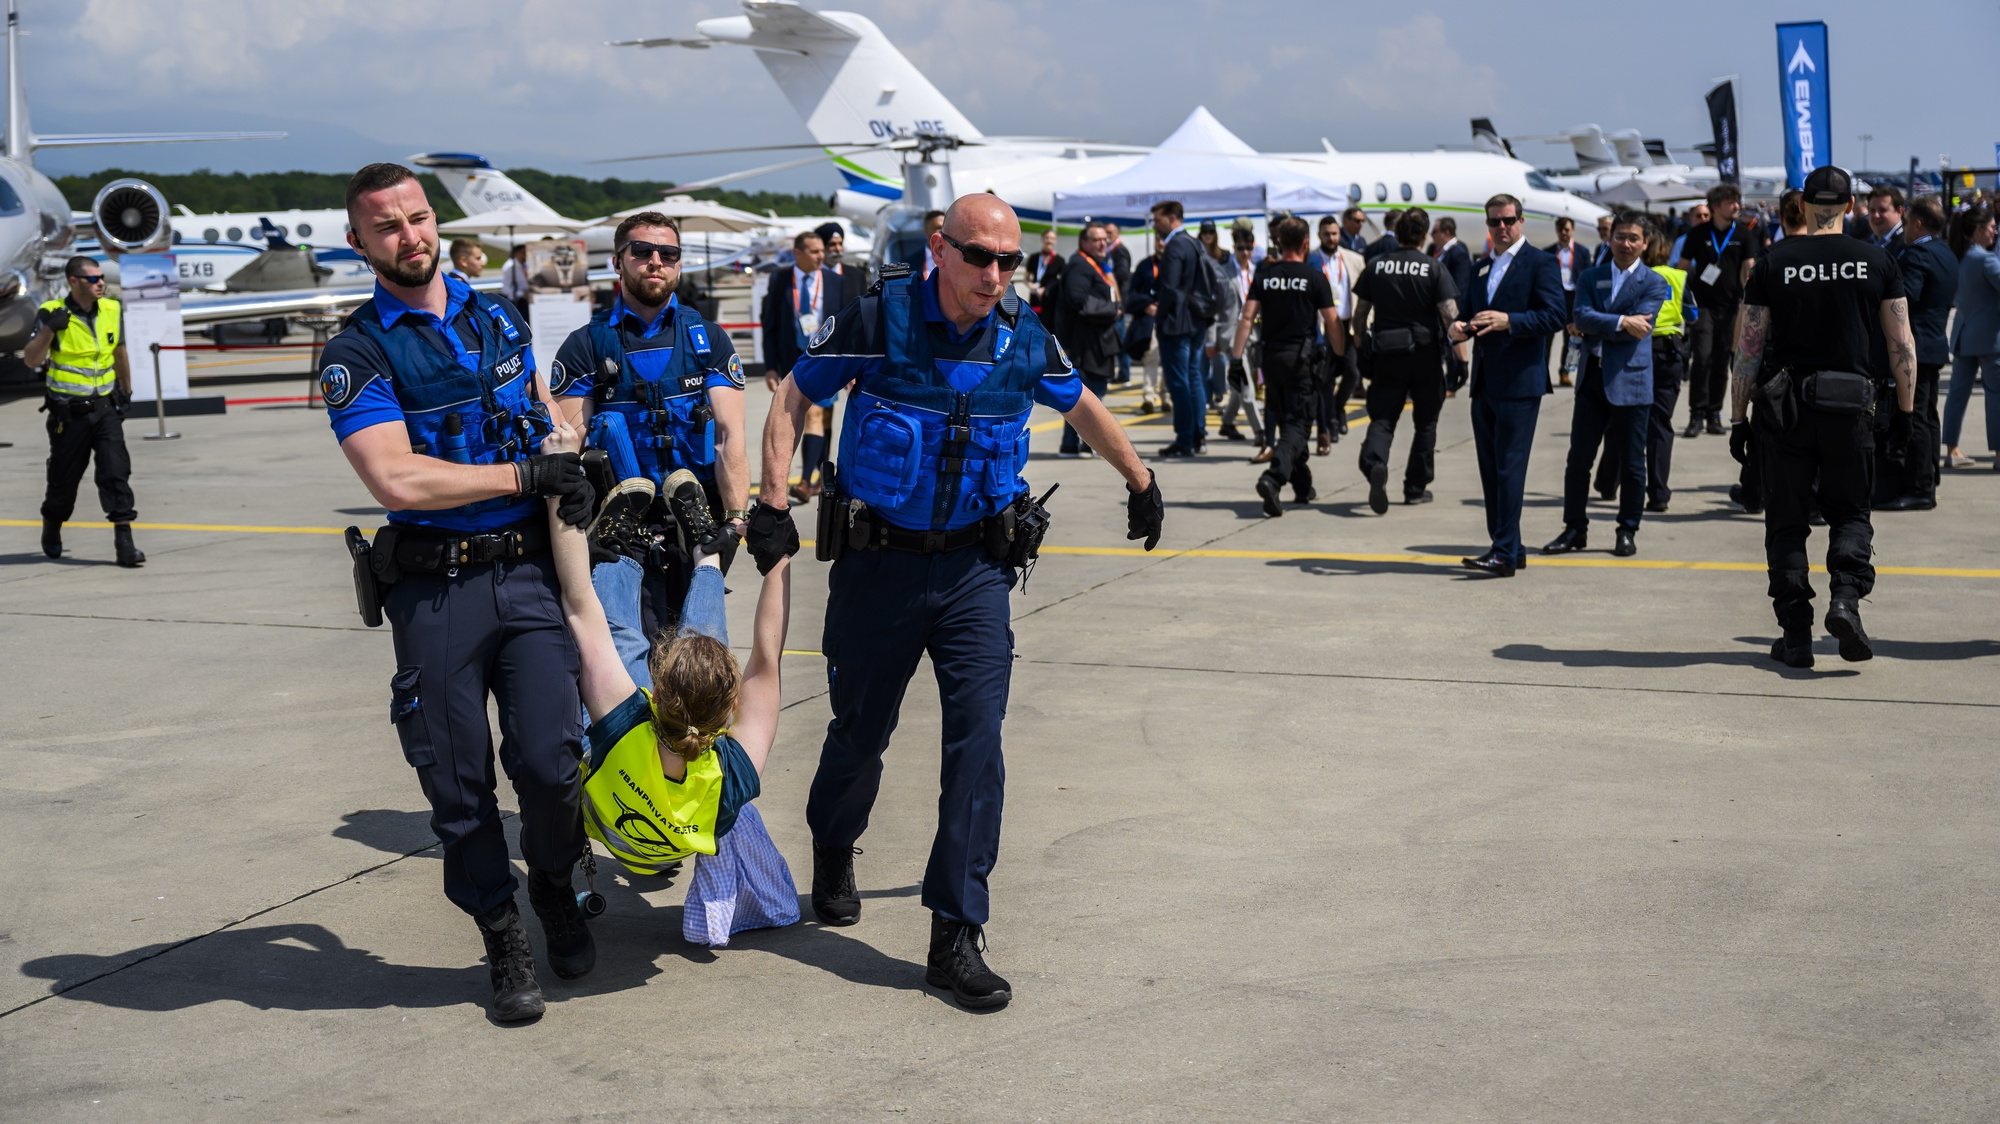 epa10647424 Police officers carry out an environmental activist of Stay Grounded and Greenpeace as they protest around an aircraft during the European Business Aviation Convention and Exhibition (EBACE), at the Geneva Airport in Geneva, Switzerland, 23 May 2023. Europe&#039;s premier on-demand aircraft and advanced air mobility event is taking place in Geneva from 23 to 25 May.  EPA/LAURENT GILLIERON